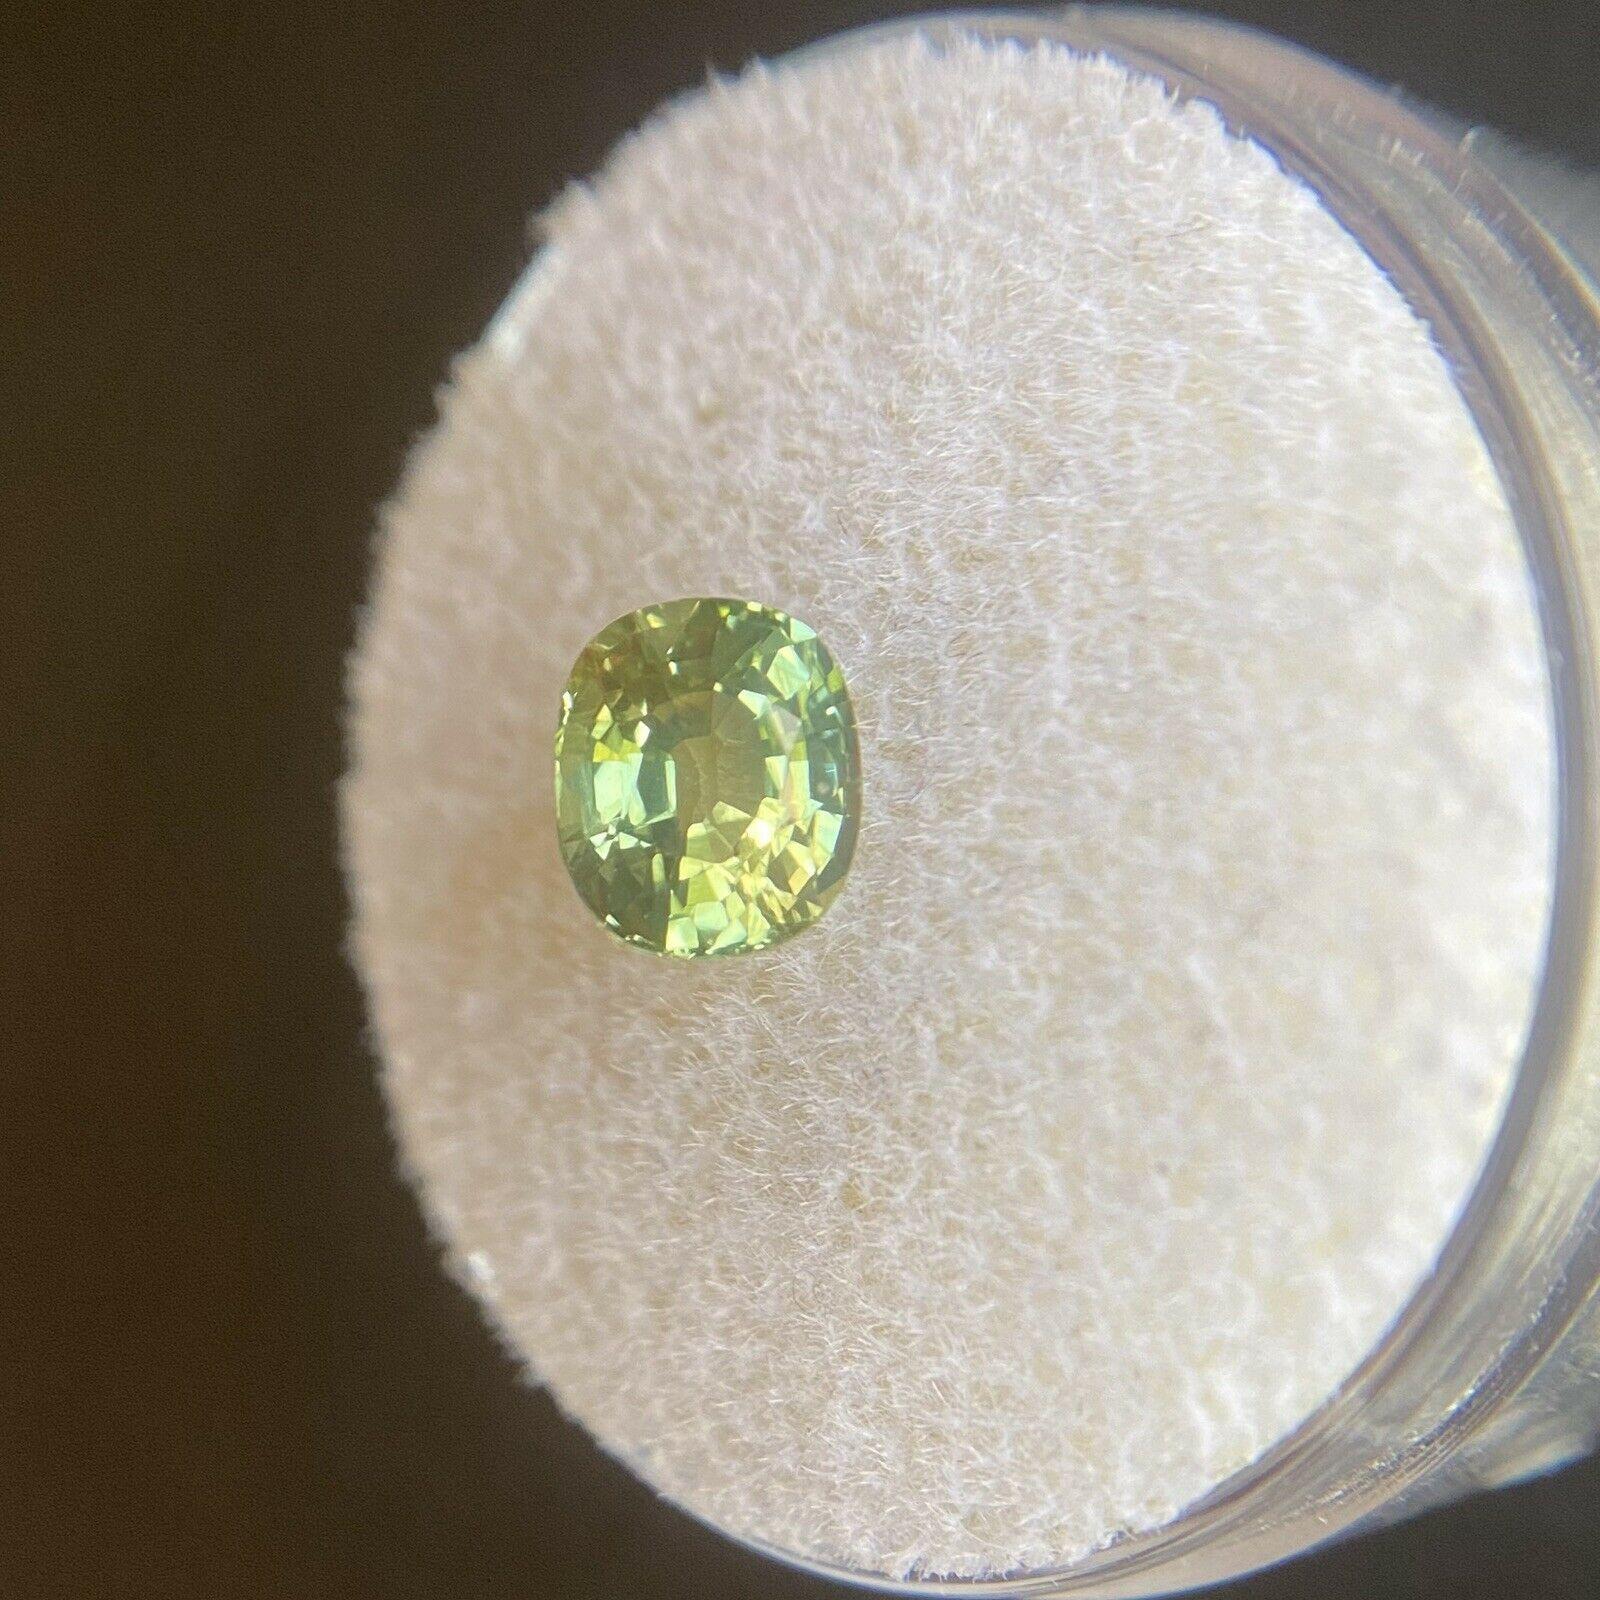 Bi Colour Green-Yellow Natural Sapphire Gem.

1.35 carat stone with a beautiful and unique yellow-green colour. Very rare for natural sapphires.

Has an excellent cushion cut and ideal polish to show great shine and colour, would look lovely in